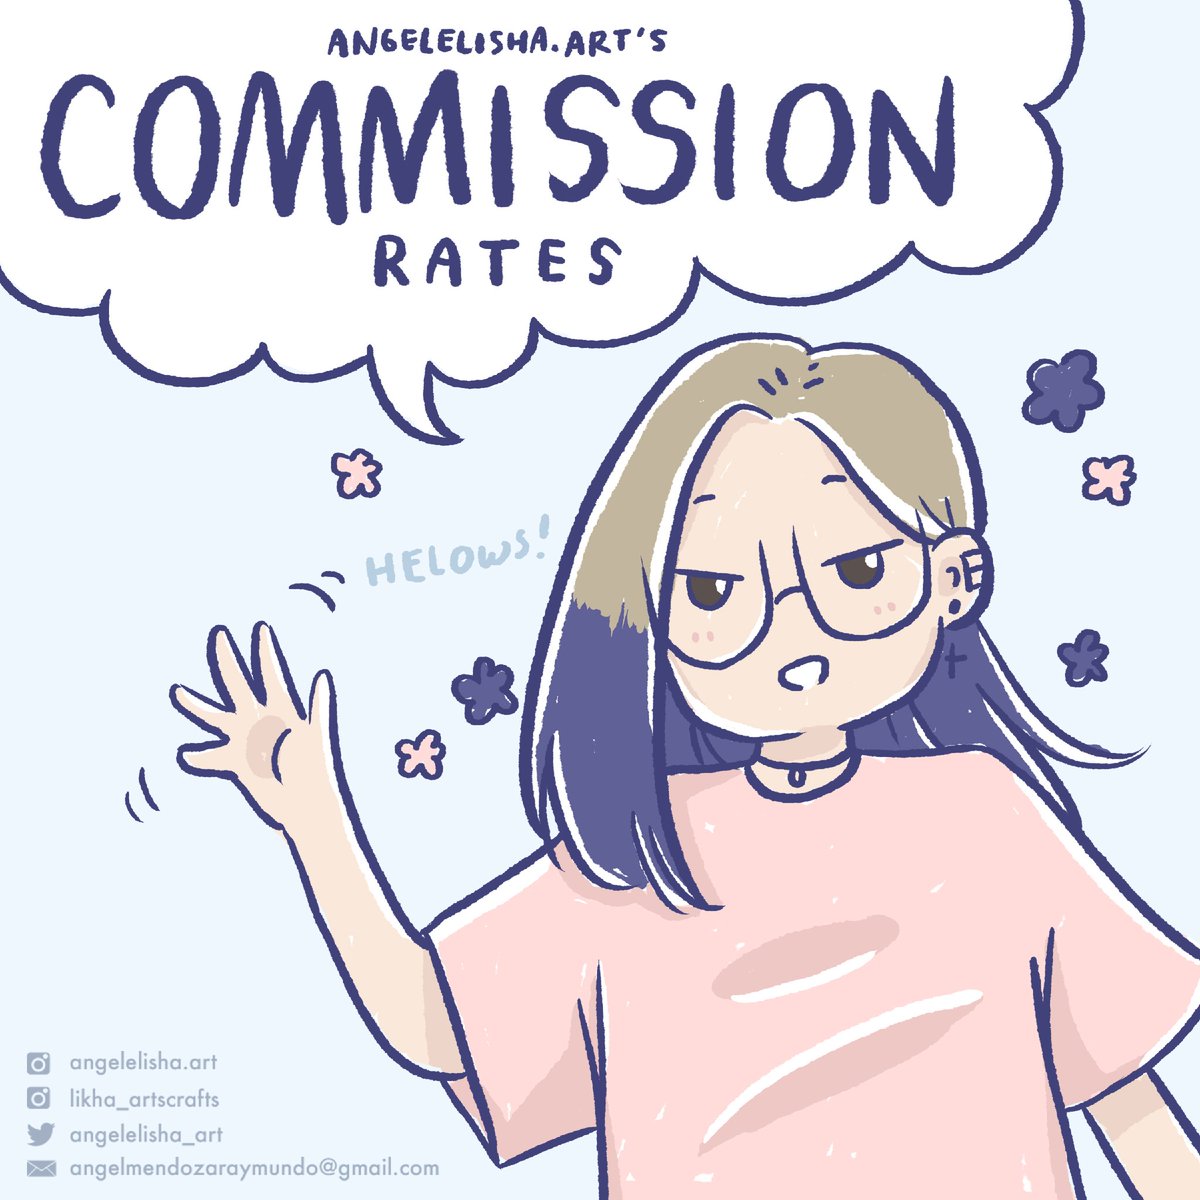 Helows! Angel here! 
I'm a fashion graphic designer, cat lover and undeniably a scorpio. ✨

Here are my new commission rates! DM me for more deets!

RTs are greatly appreciated ❤️ 